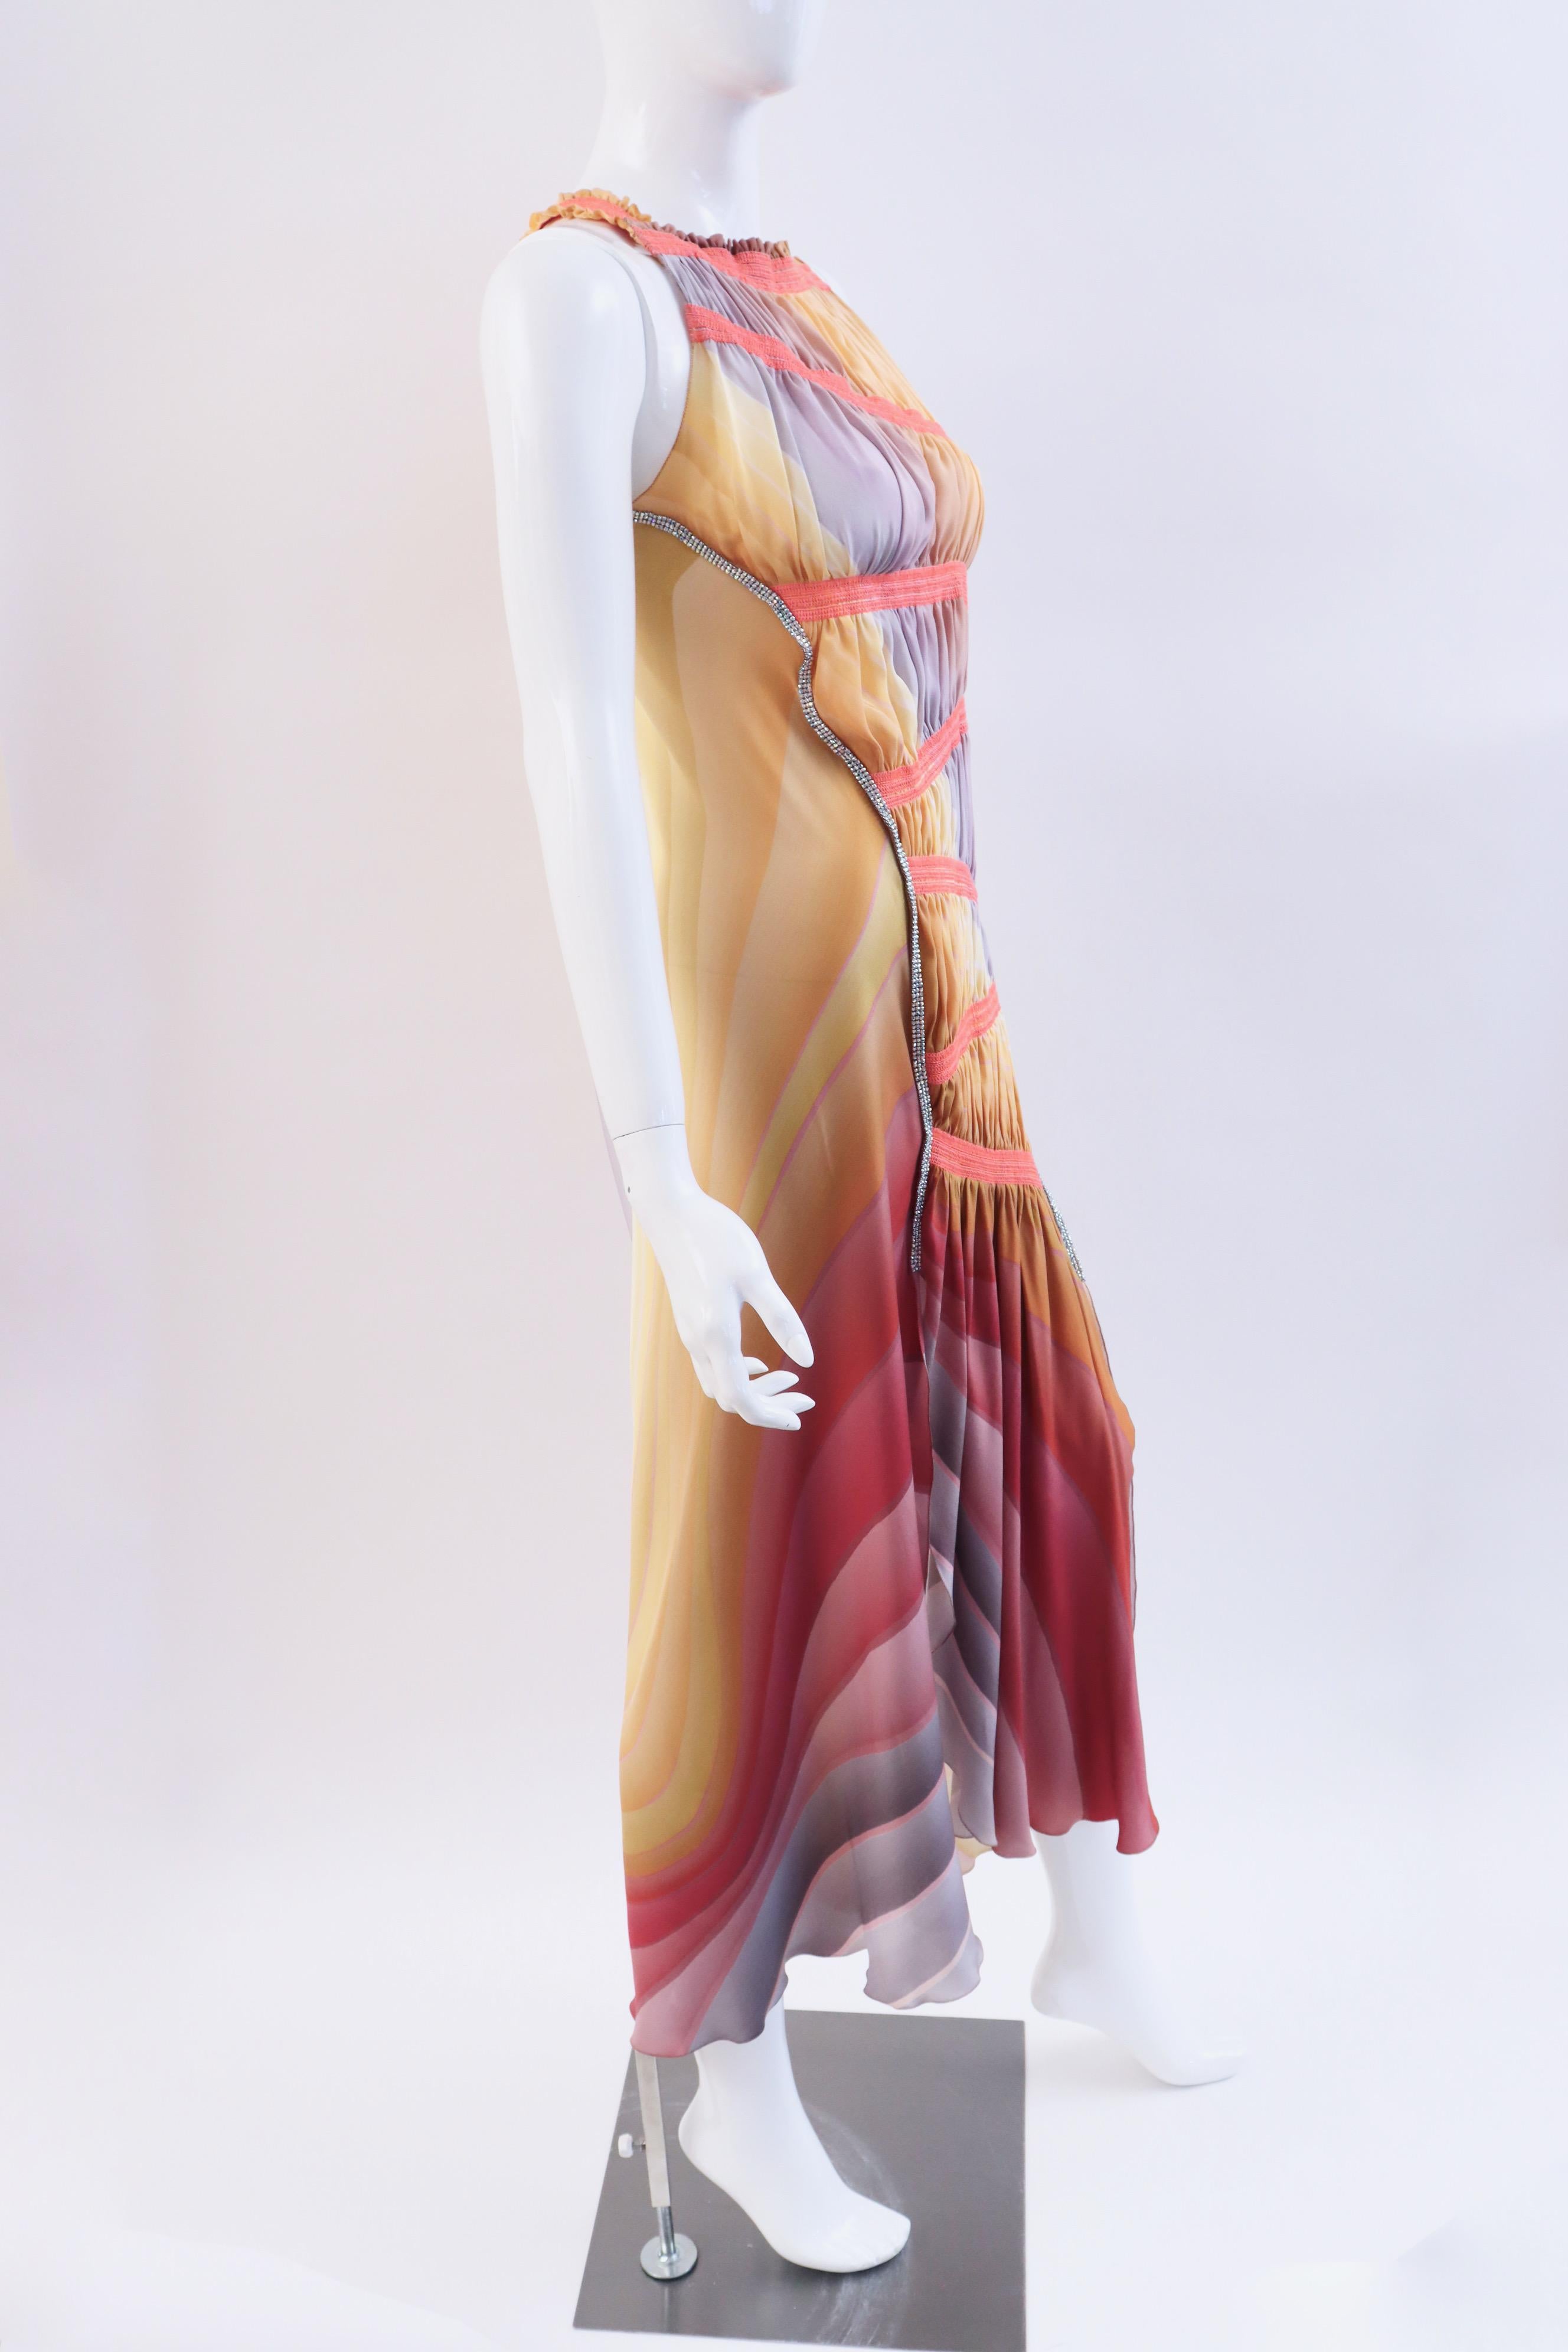 FENDI Pastel Rainbow Silk Dress With Rhinestones.  This dress is stunning.  It is perfect for summer. 

 

Designer: Fendi

Condition: Excellent

Size: 38, fits like a small

Length: 52.5 inches

Bust: 16 inches across

Waist: 18 inches across at